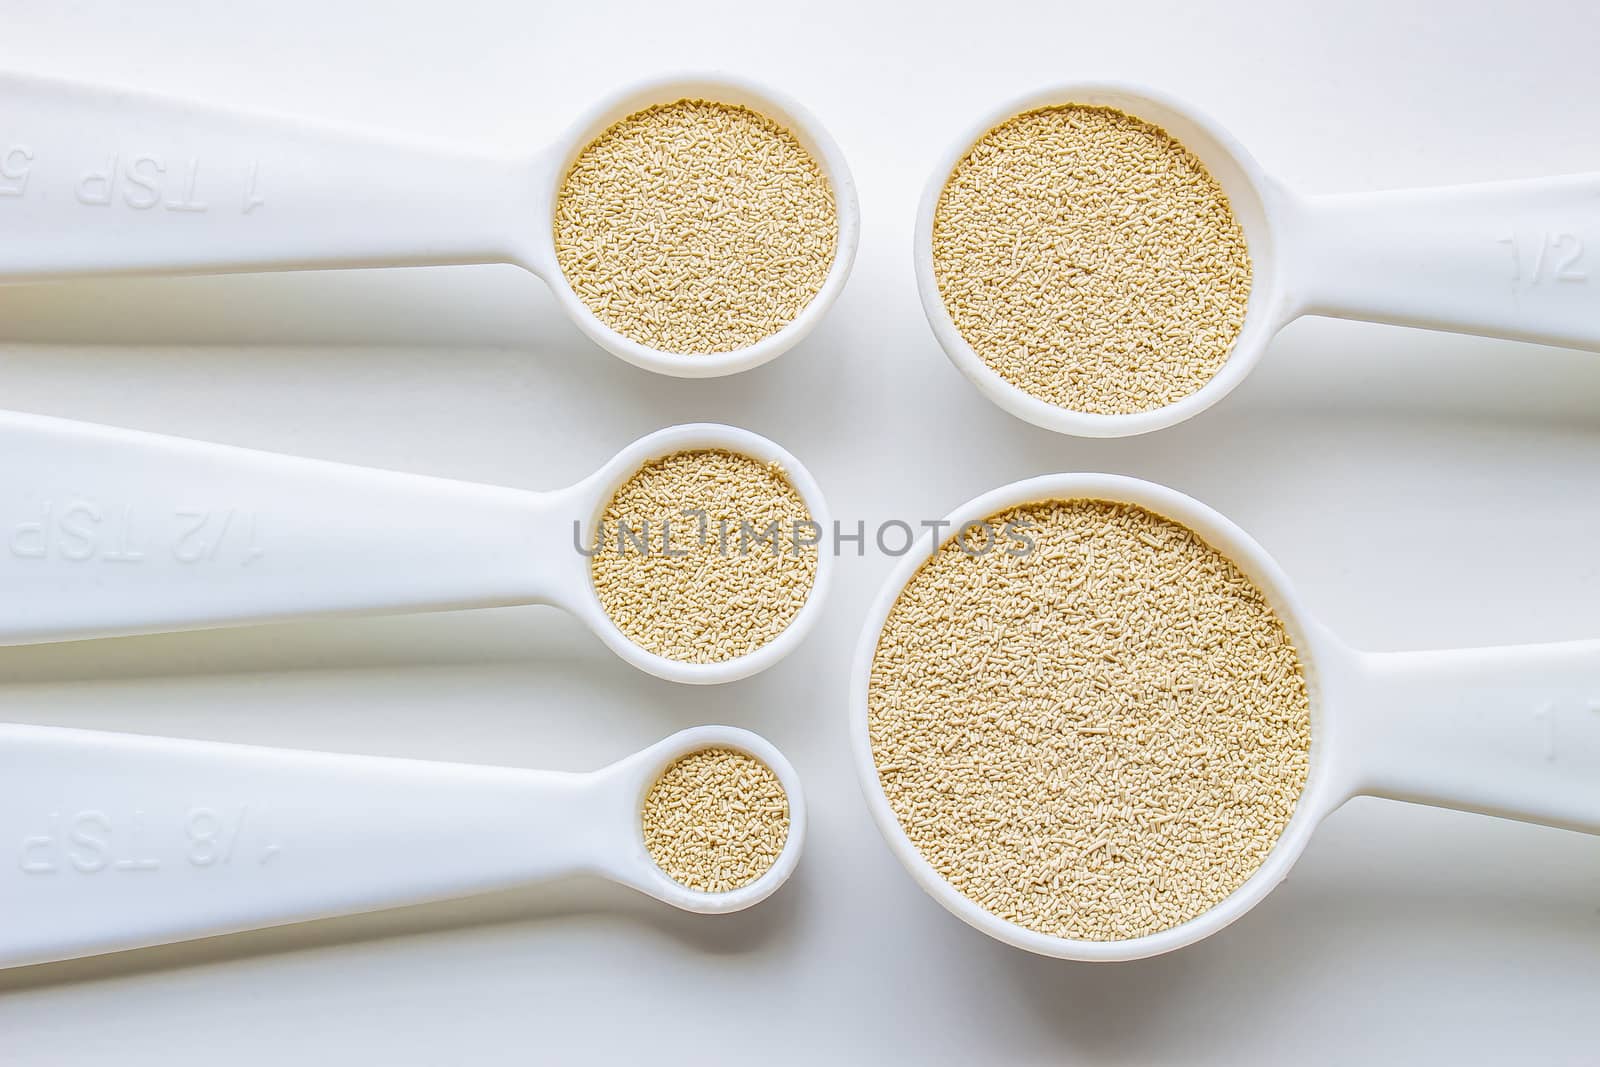 A close view of some measurement baking spoons with yeast on them